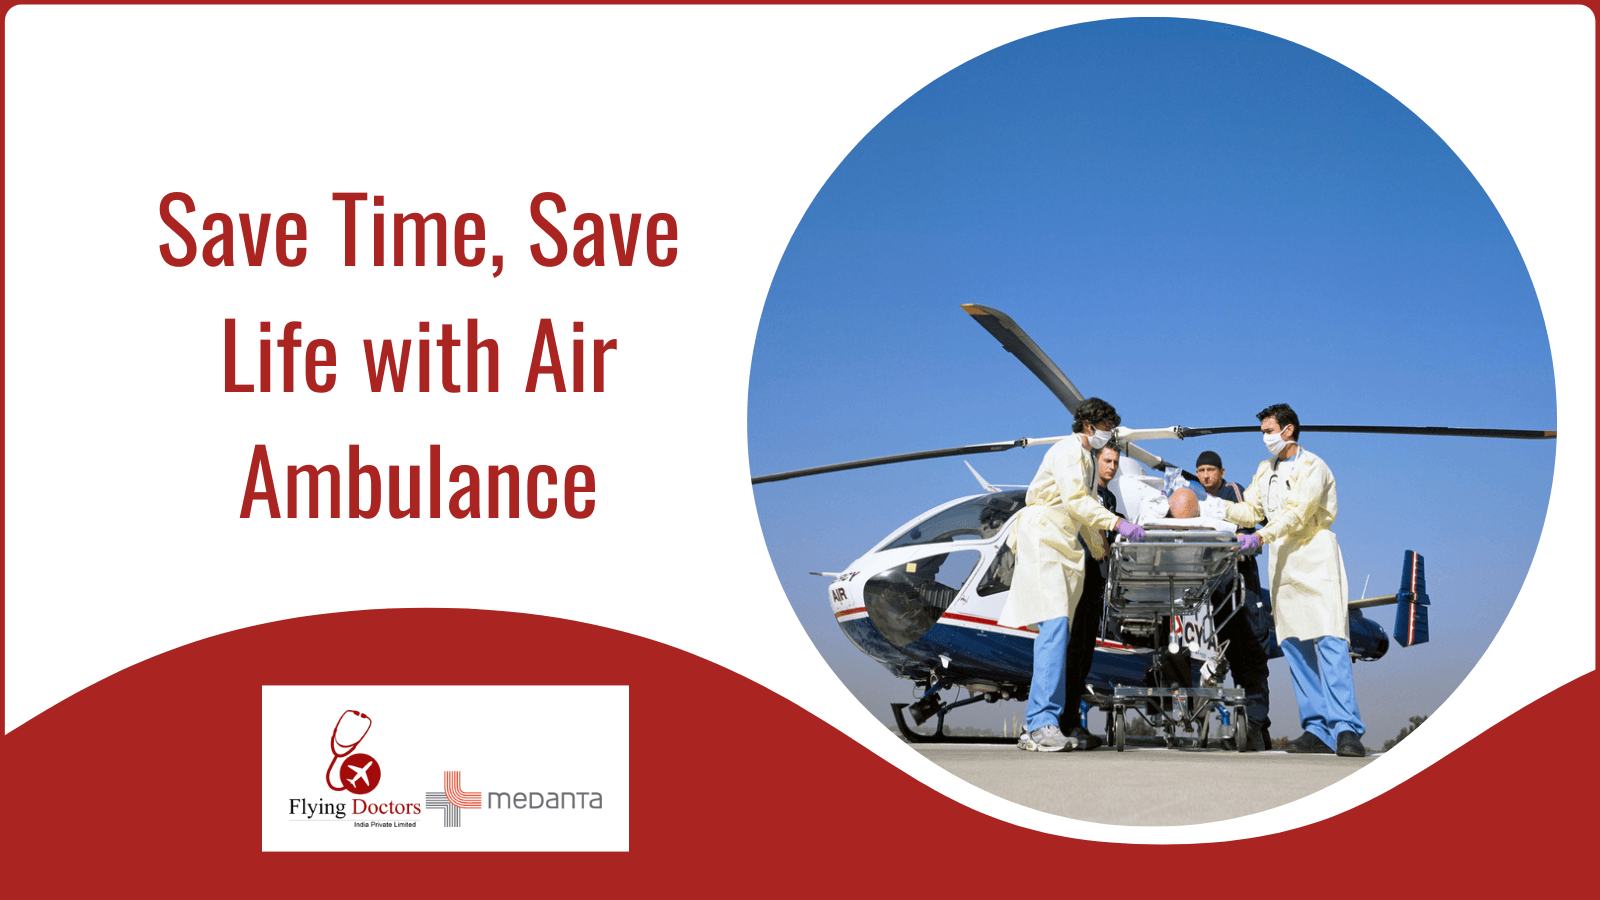 Save Time, Save Life with Air Ambulance